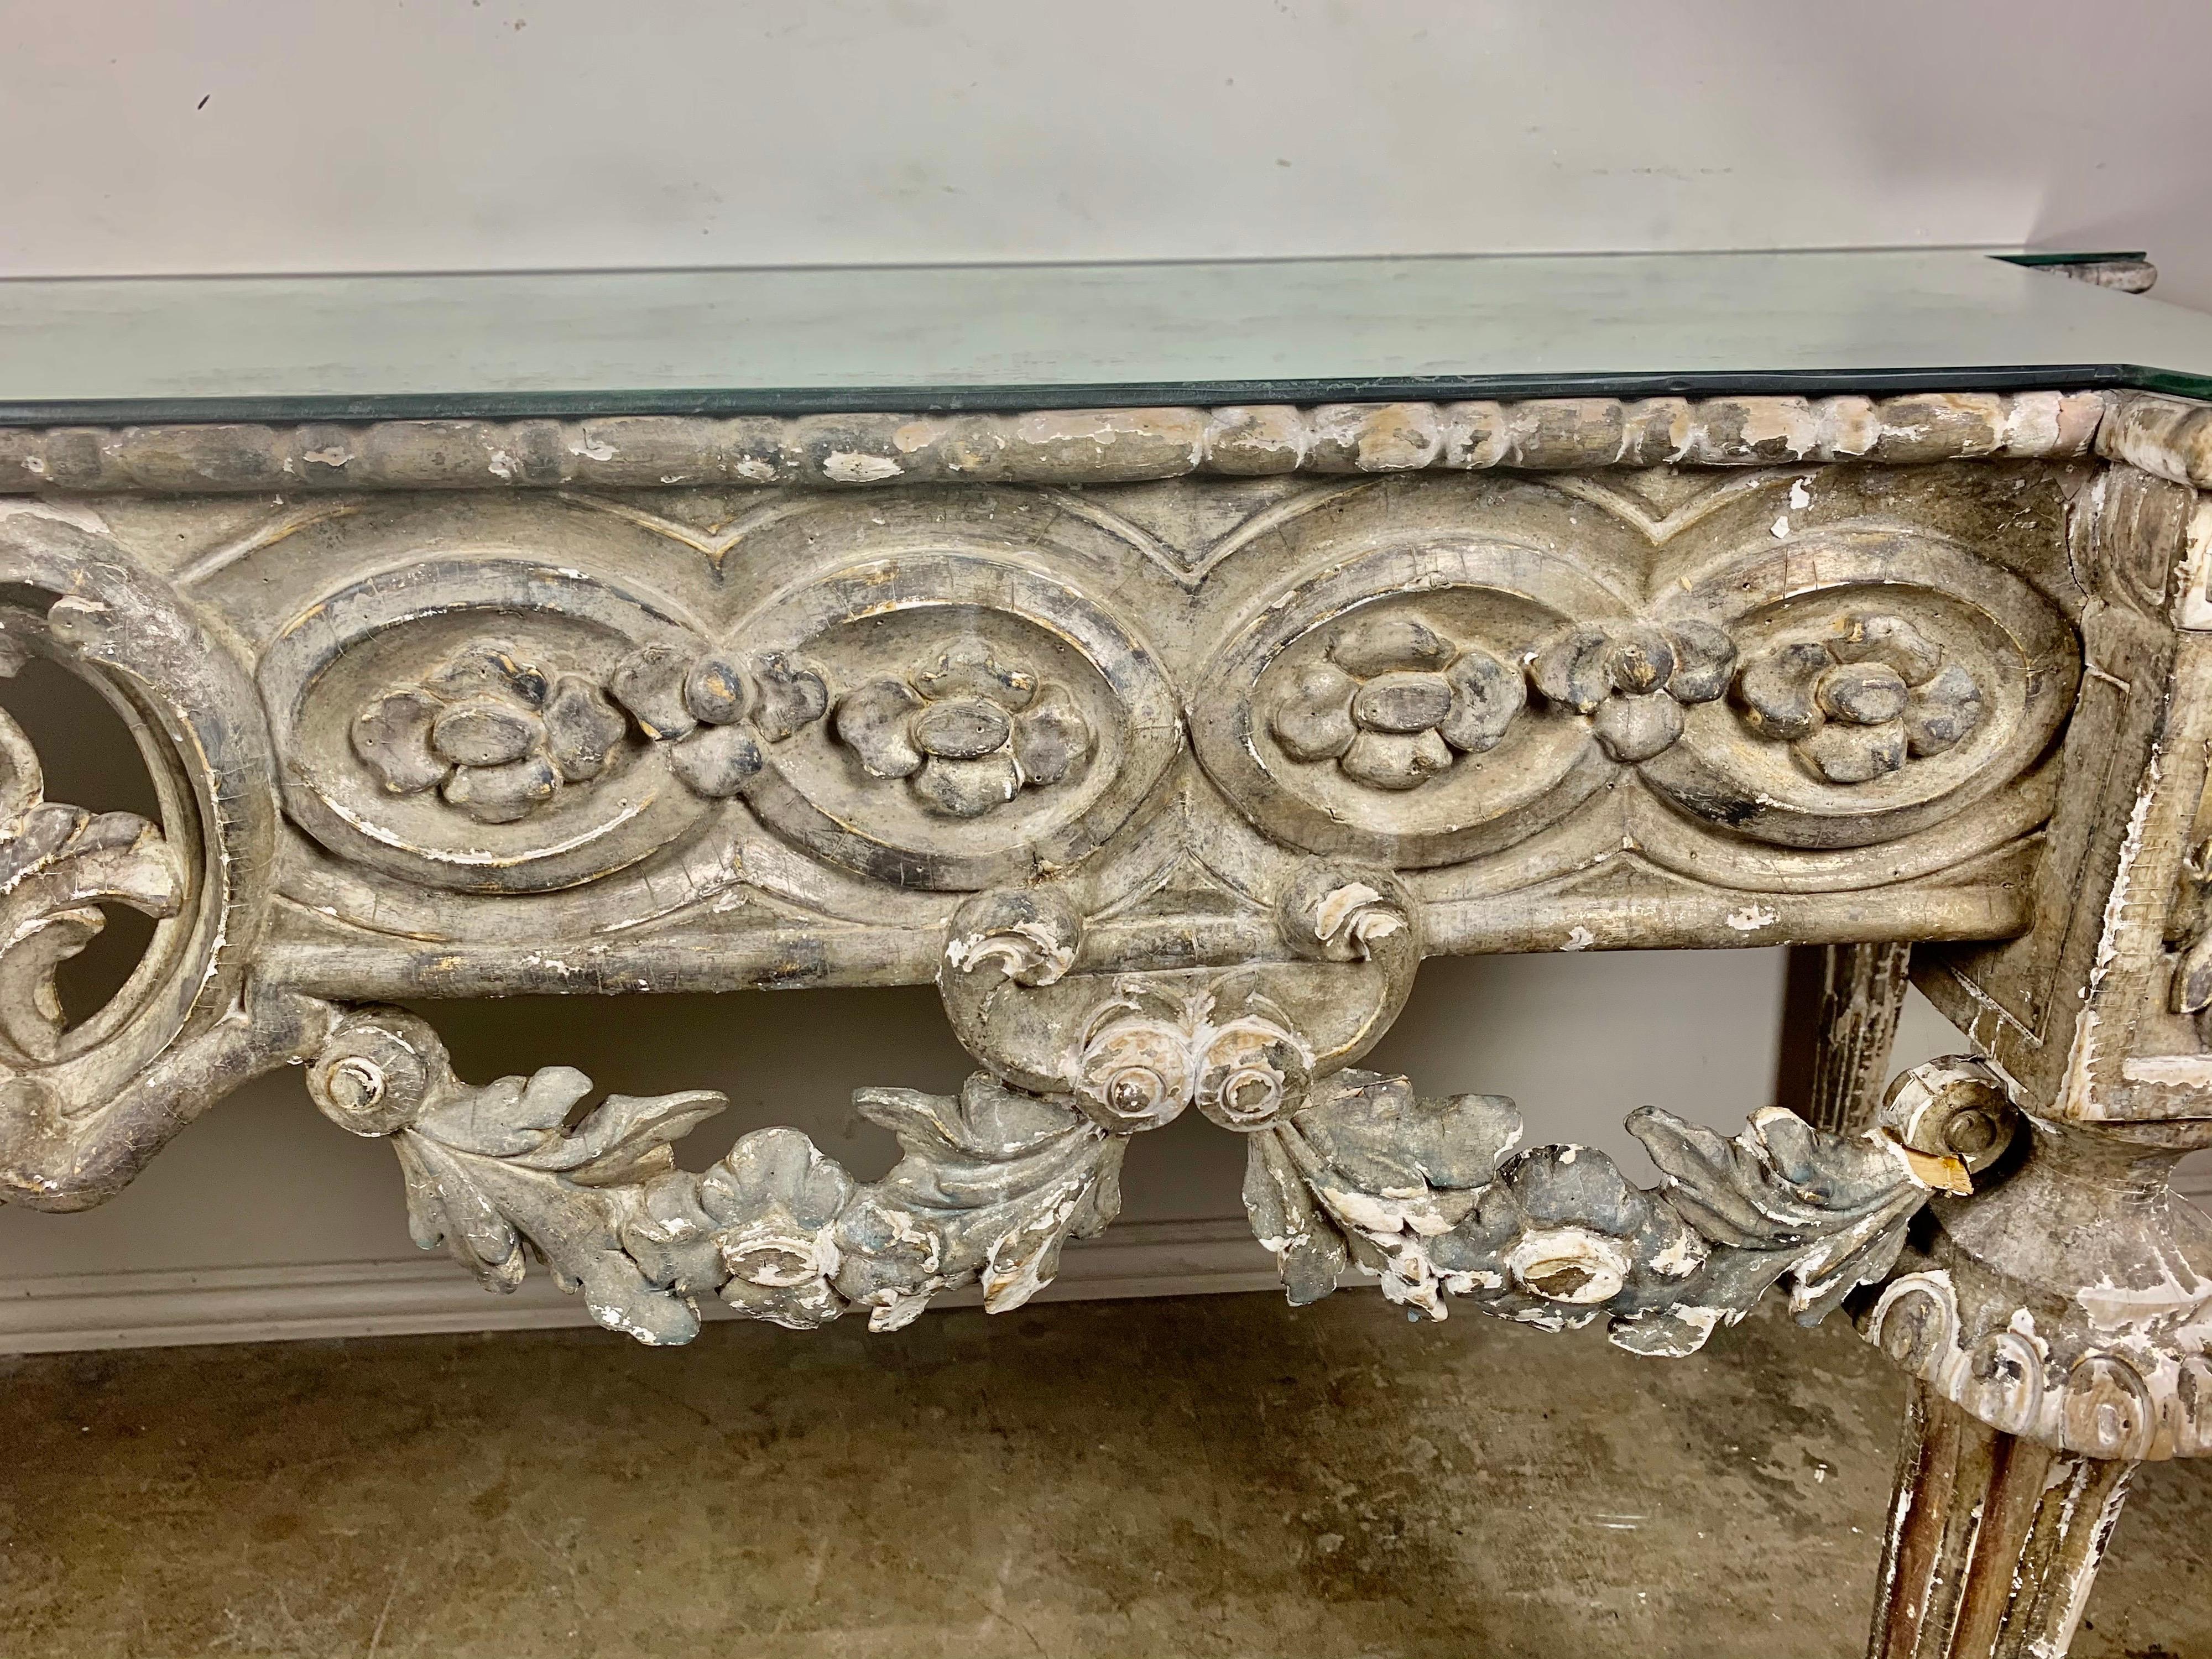 19th century Italian Rococo style console. The table stands on four fluted tapered legs. The front apron is decorated with carved garlands hanging from a carved panel with a center cartouche. There is intricate carving and details throughout. The